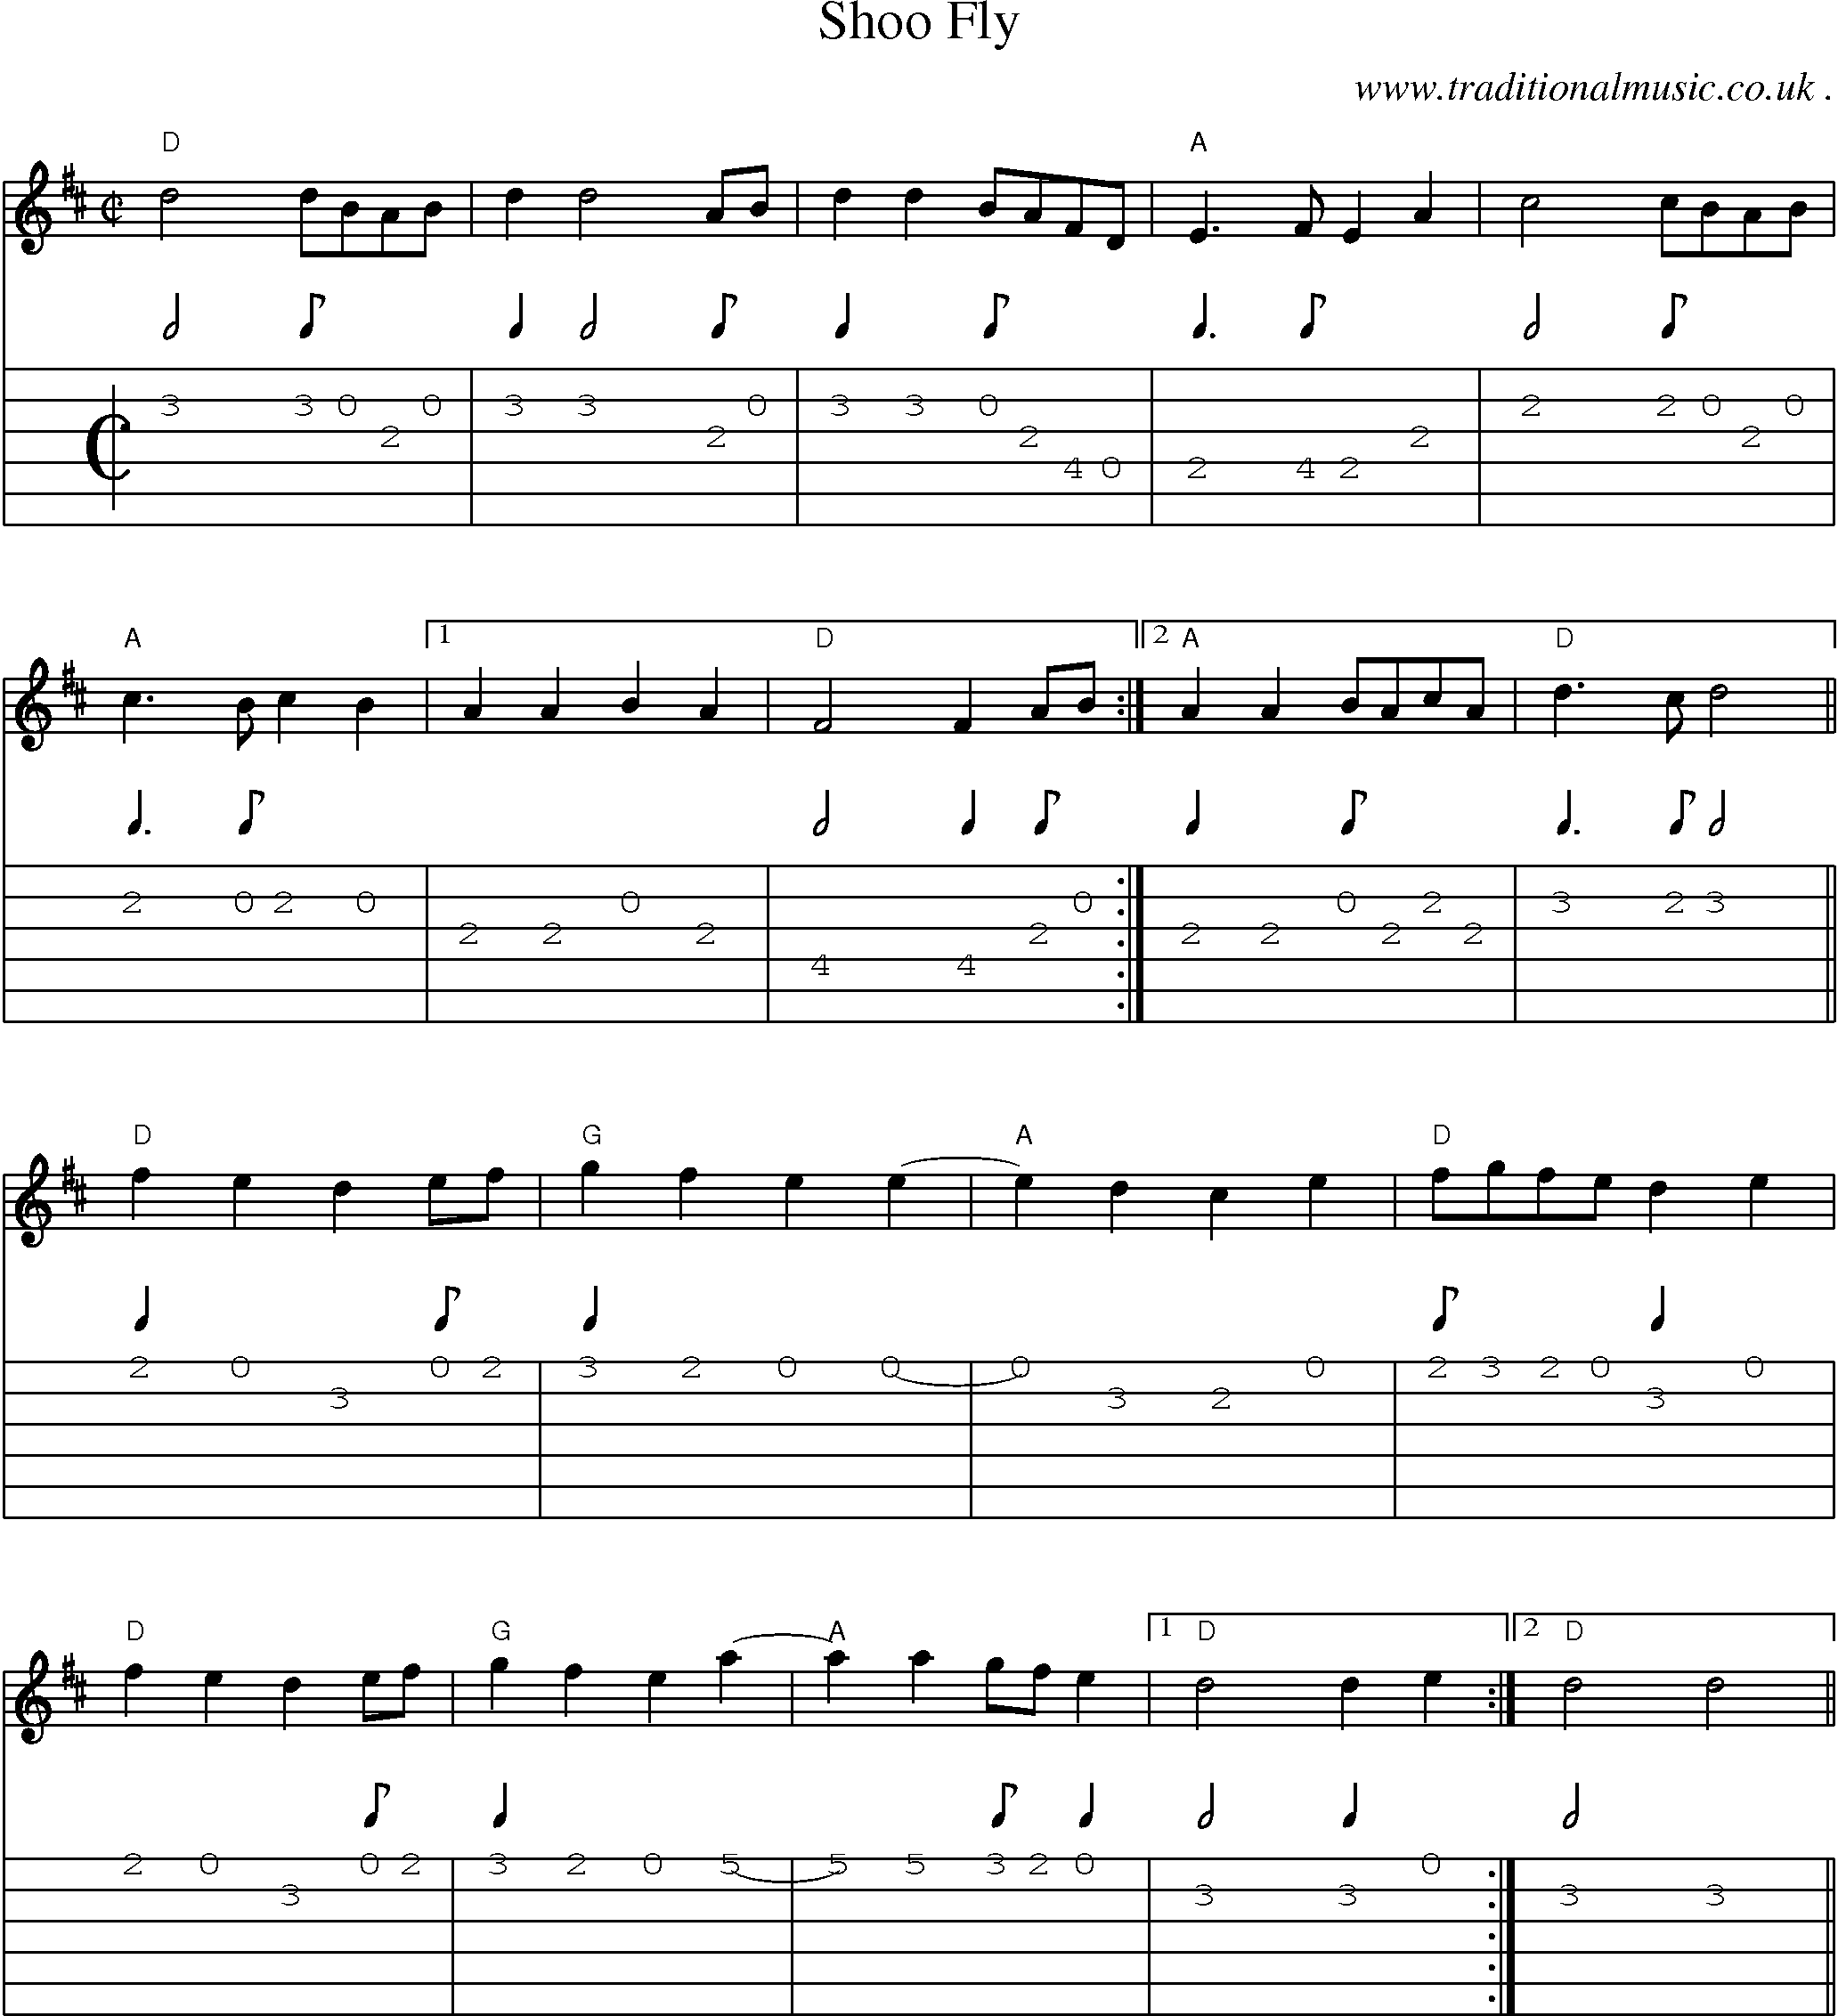 Music Score and Guitar Tabs for Shoo Fly